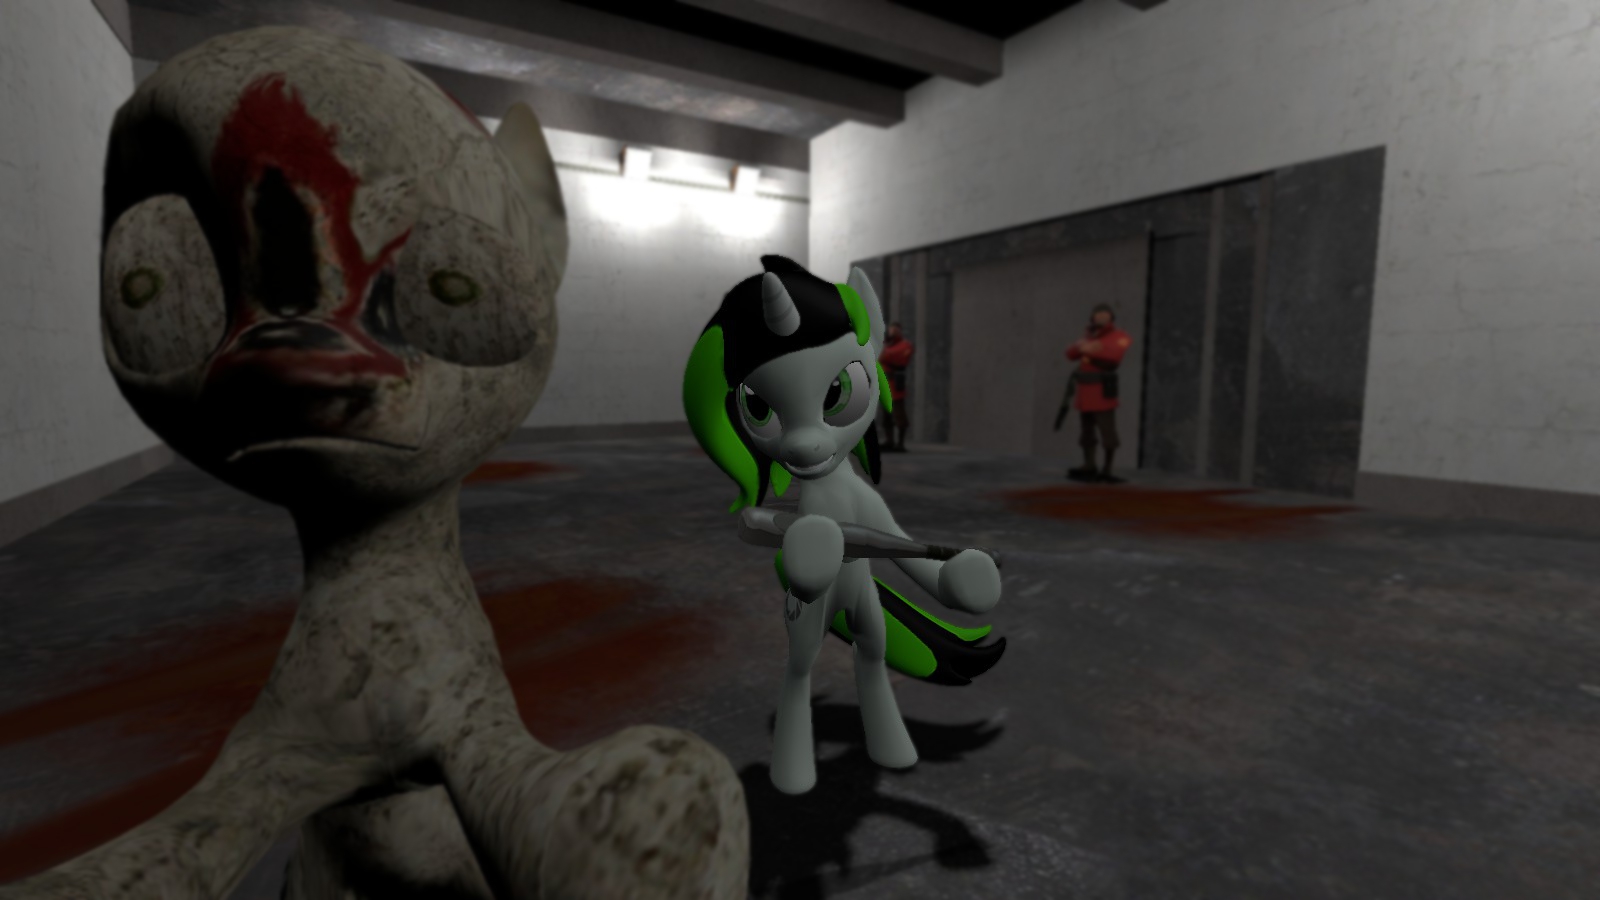 SCP-173 (Definitive Edition) by BatteryMasterMMD on Newgrounds